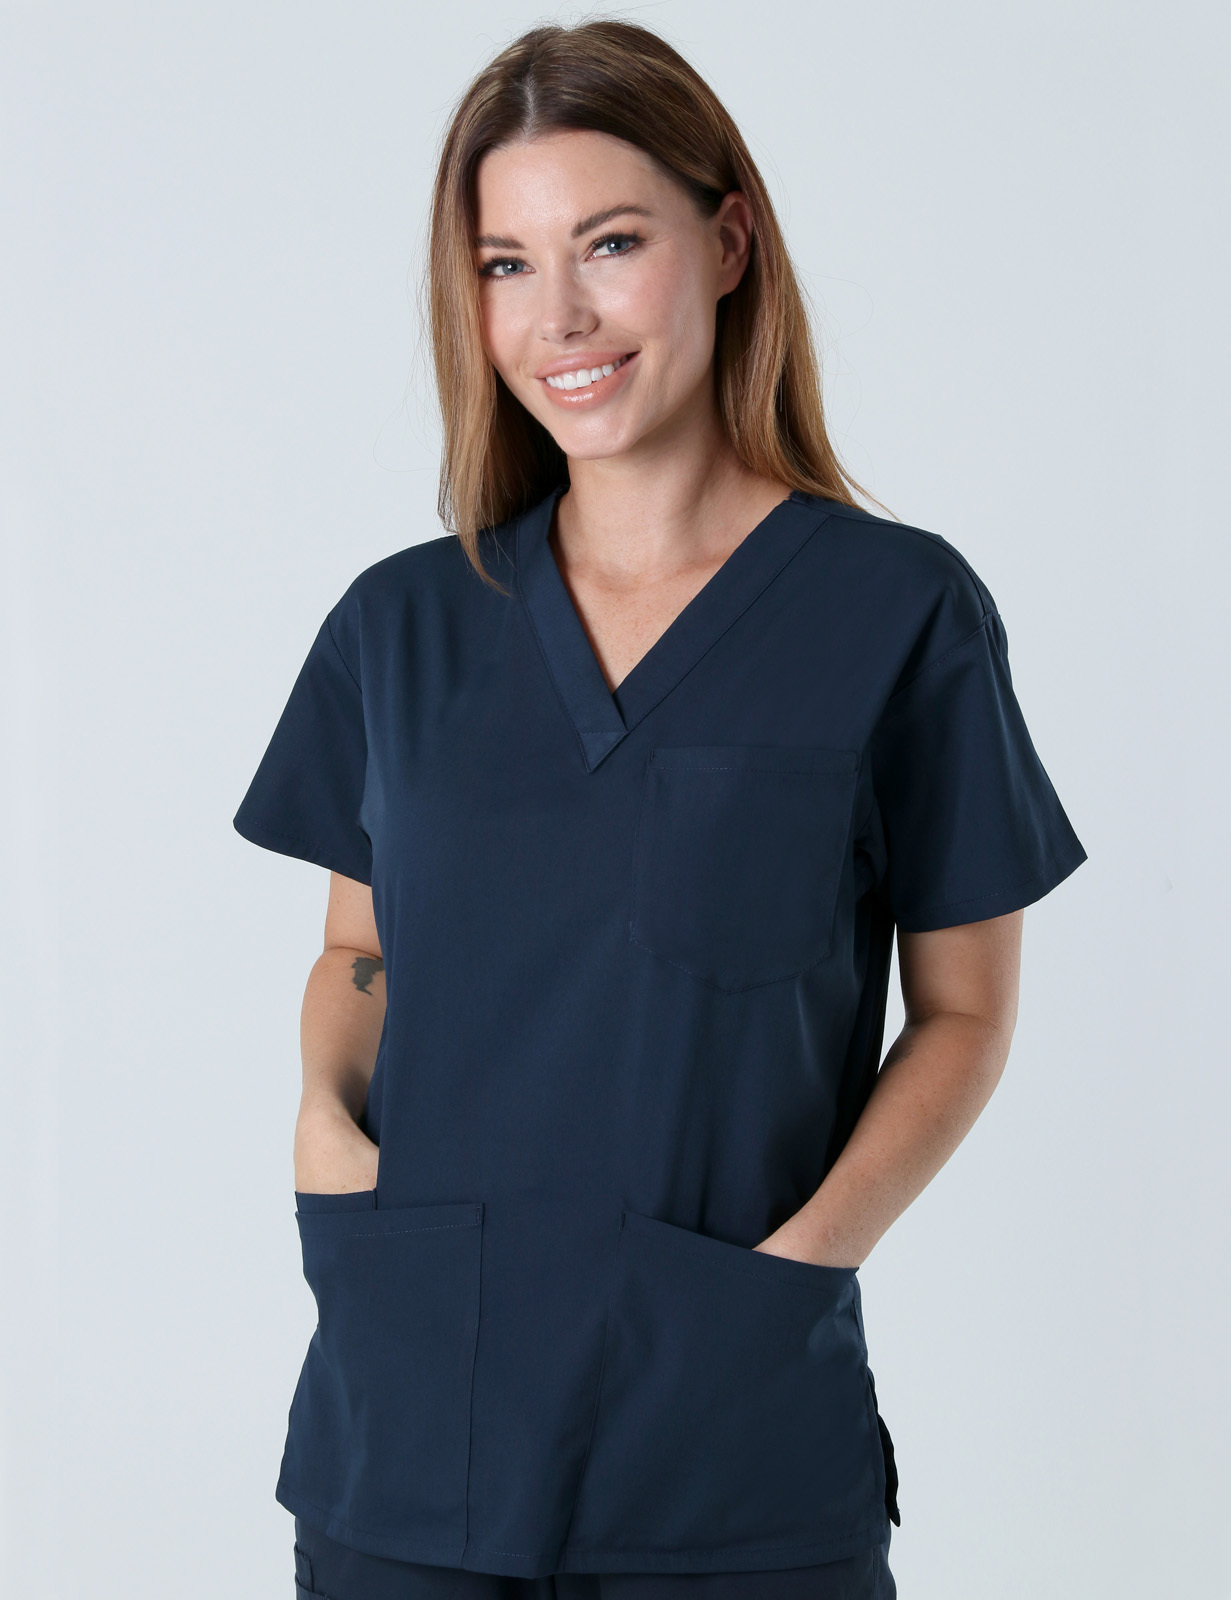 Weipa Hospital - ED RN (4 Pocket Scrub Top and Cargo Pants in Navy incl Logos)